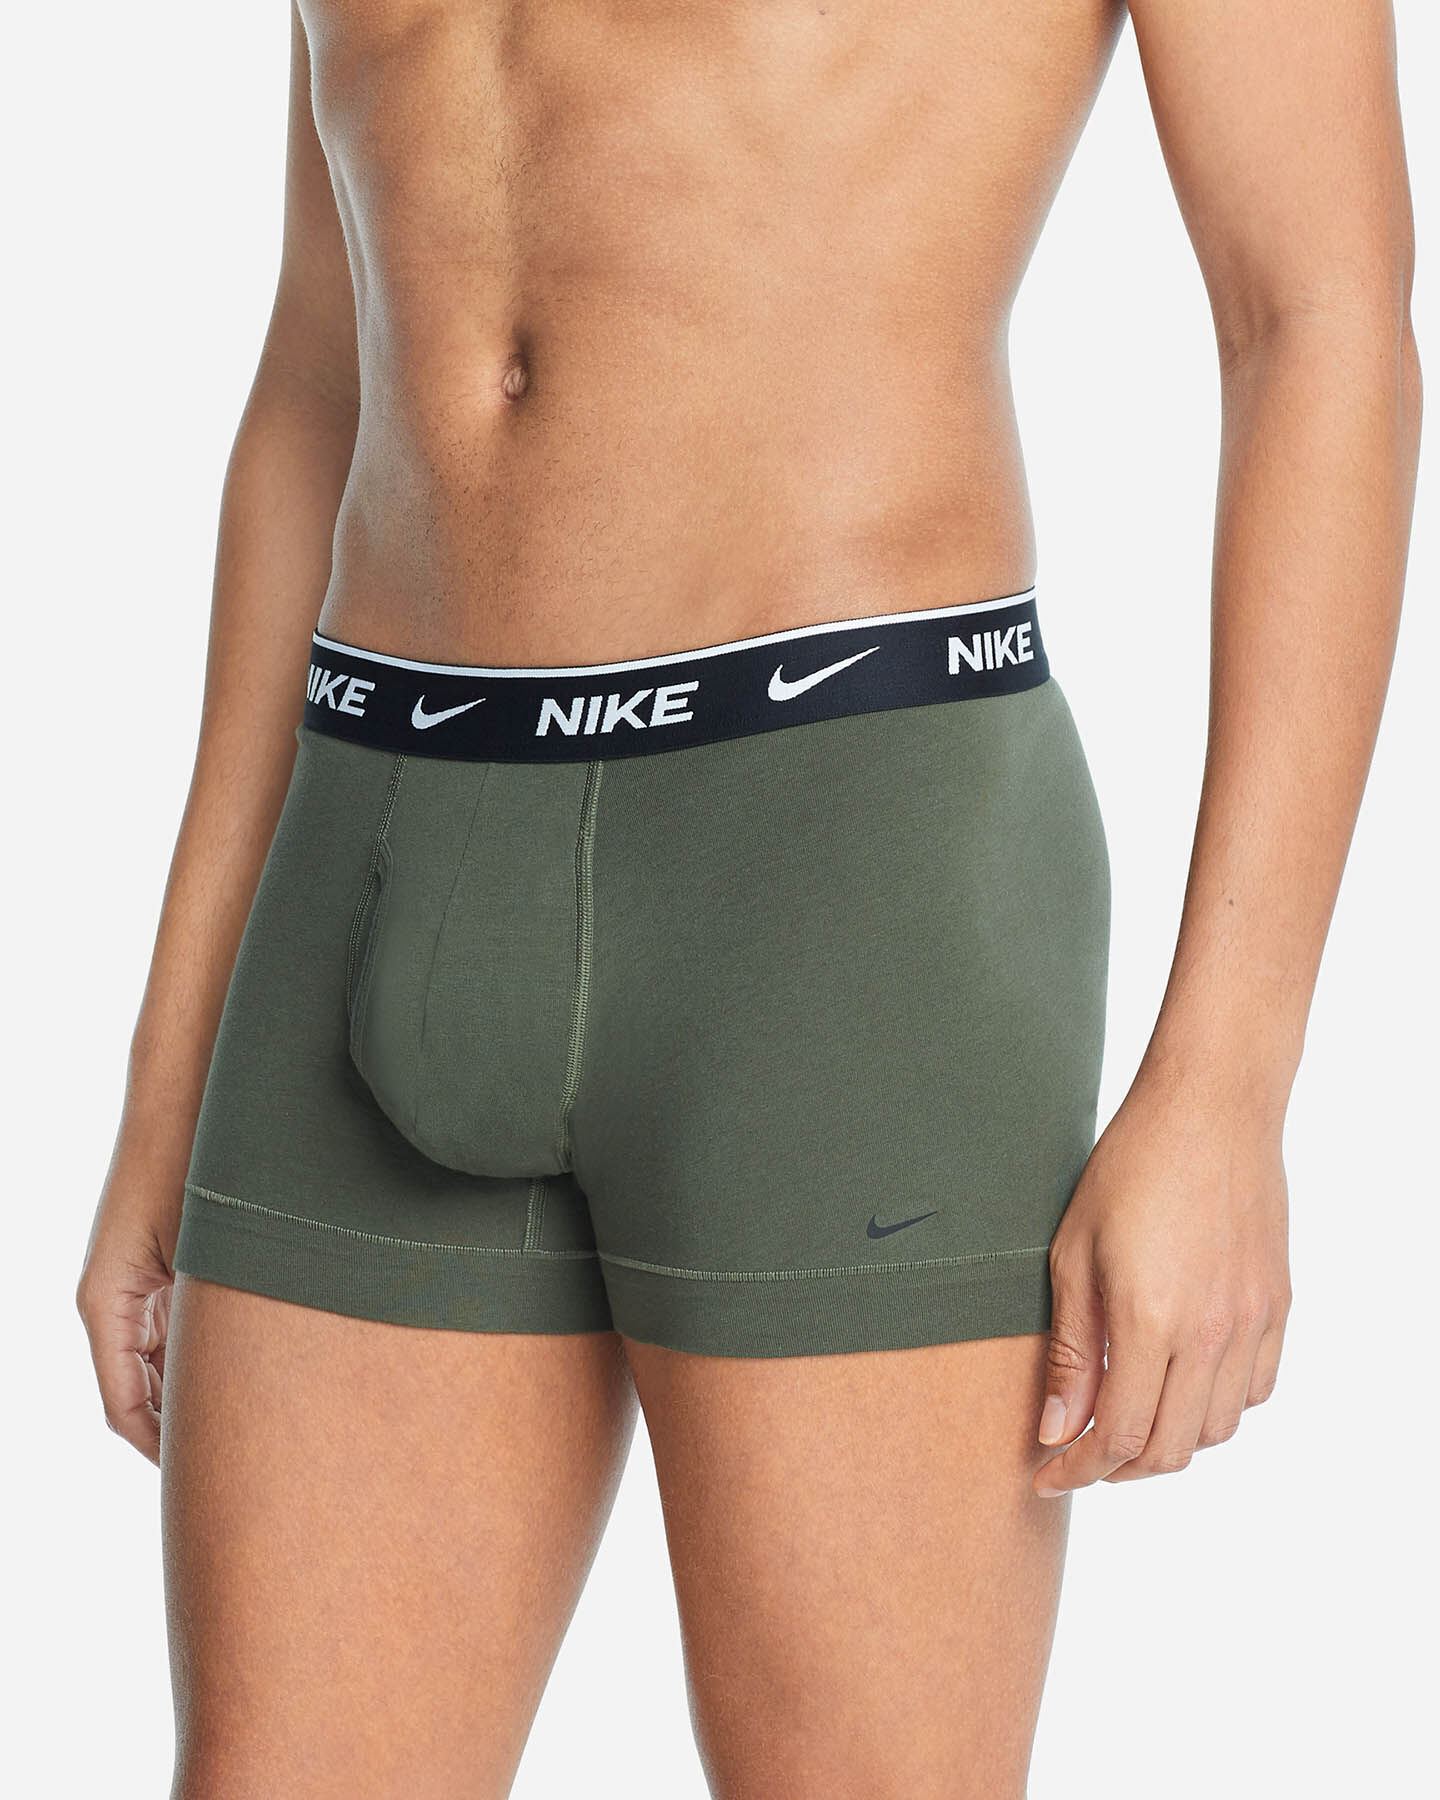  Intimo NIKE 2PACK BOXER EVERYDAY M S4099898|KUY|S scatto 2